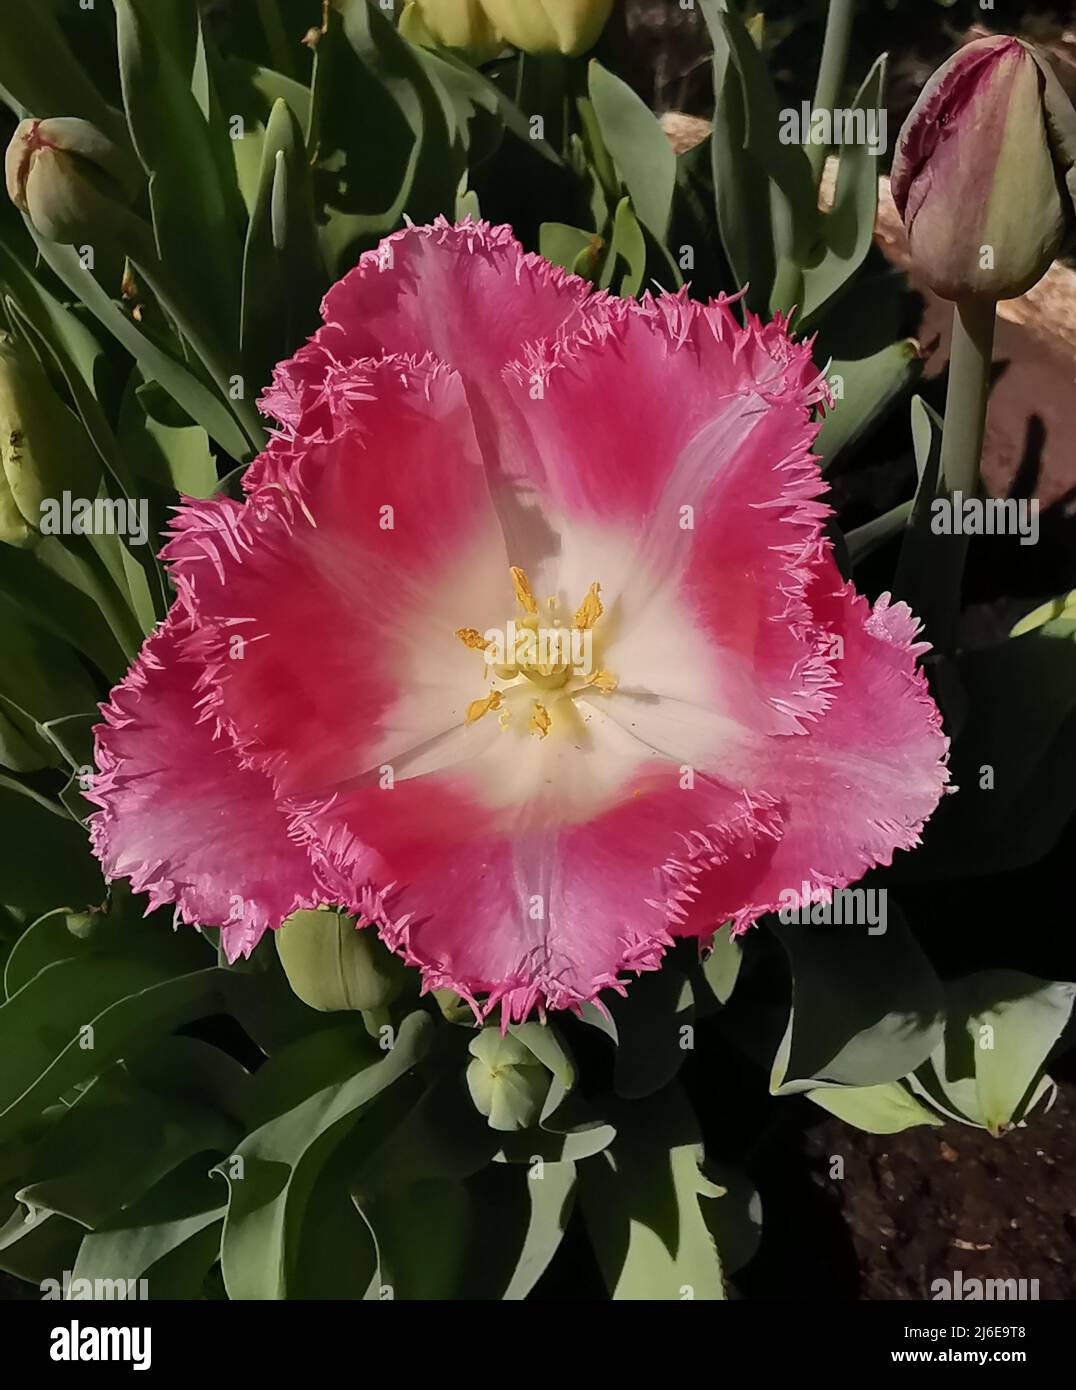 Single pink tulip with shaggy edged petals and buds behind Stock Photo